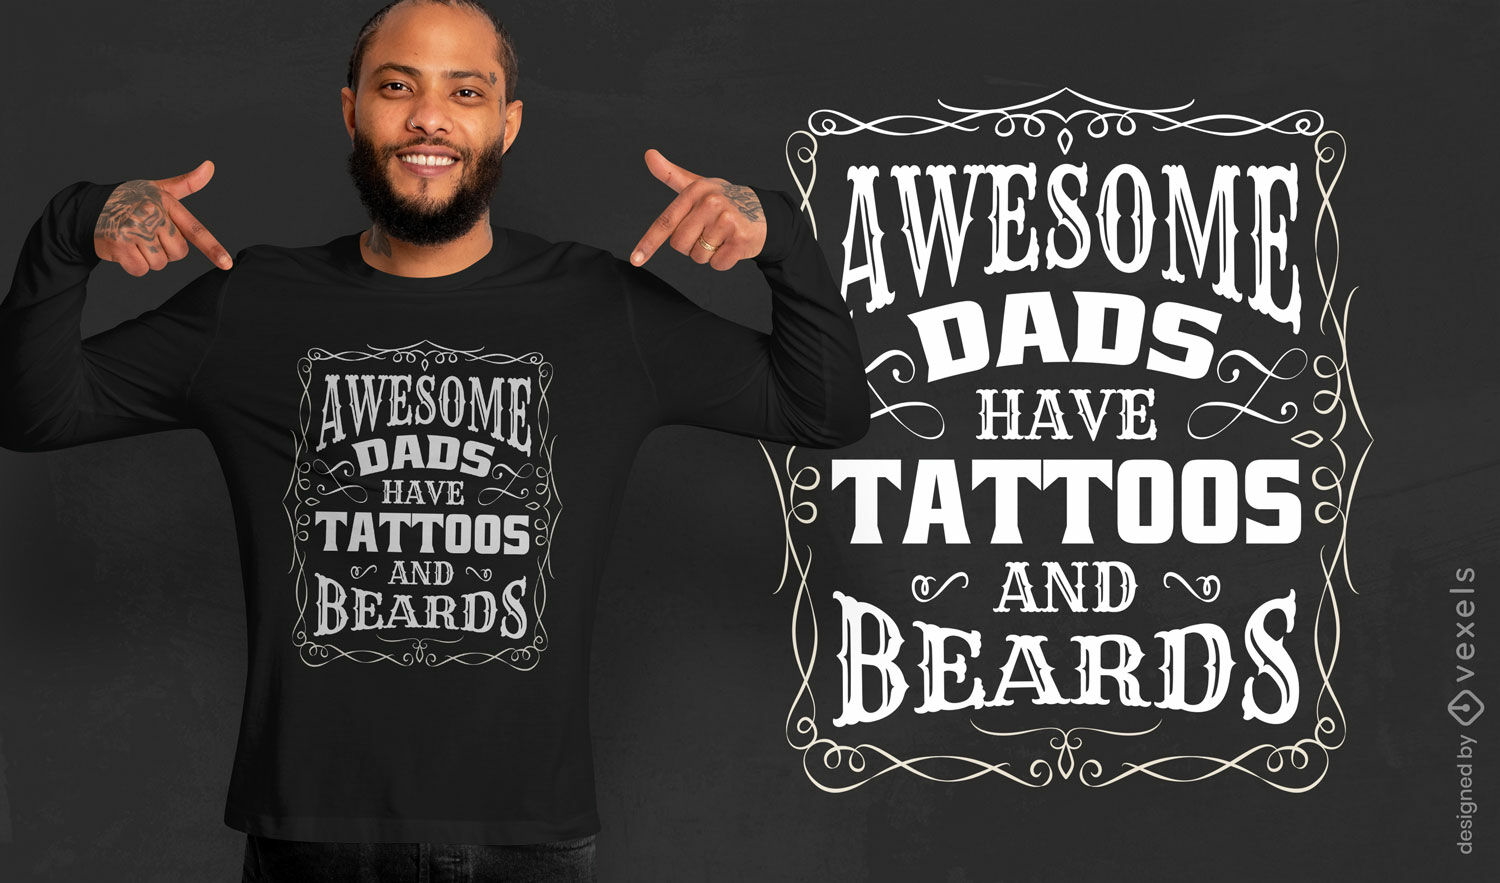 Awesome dads with tattoos quote t-shirt design